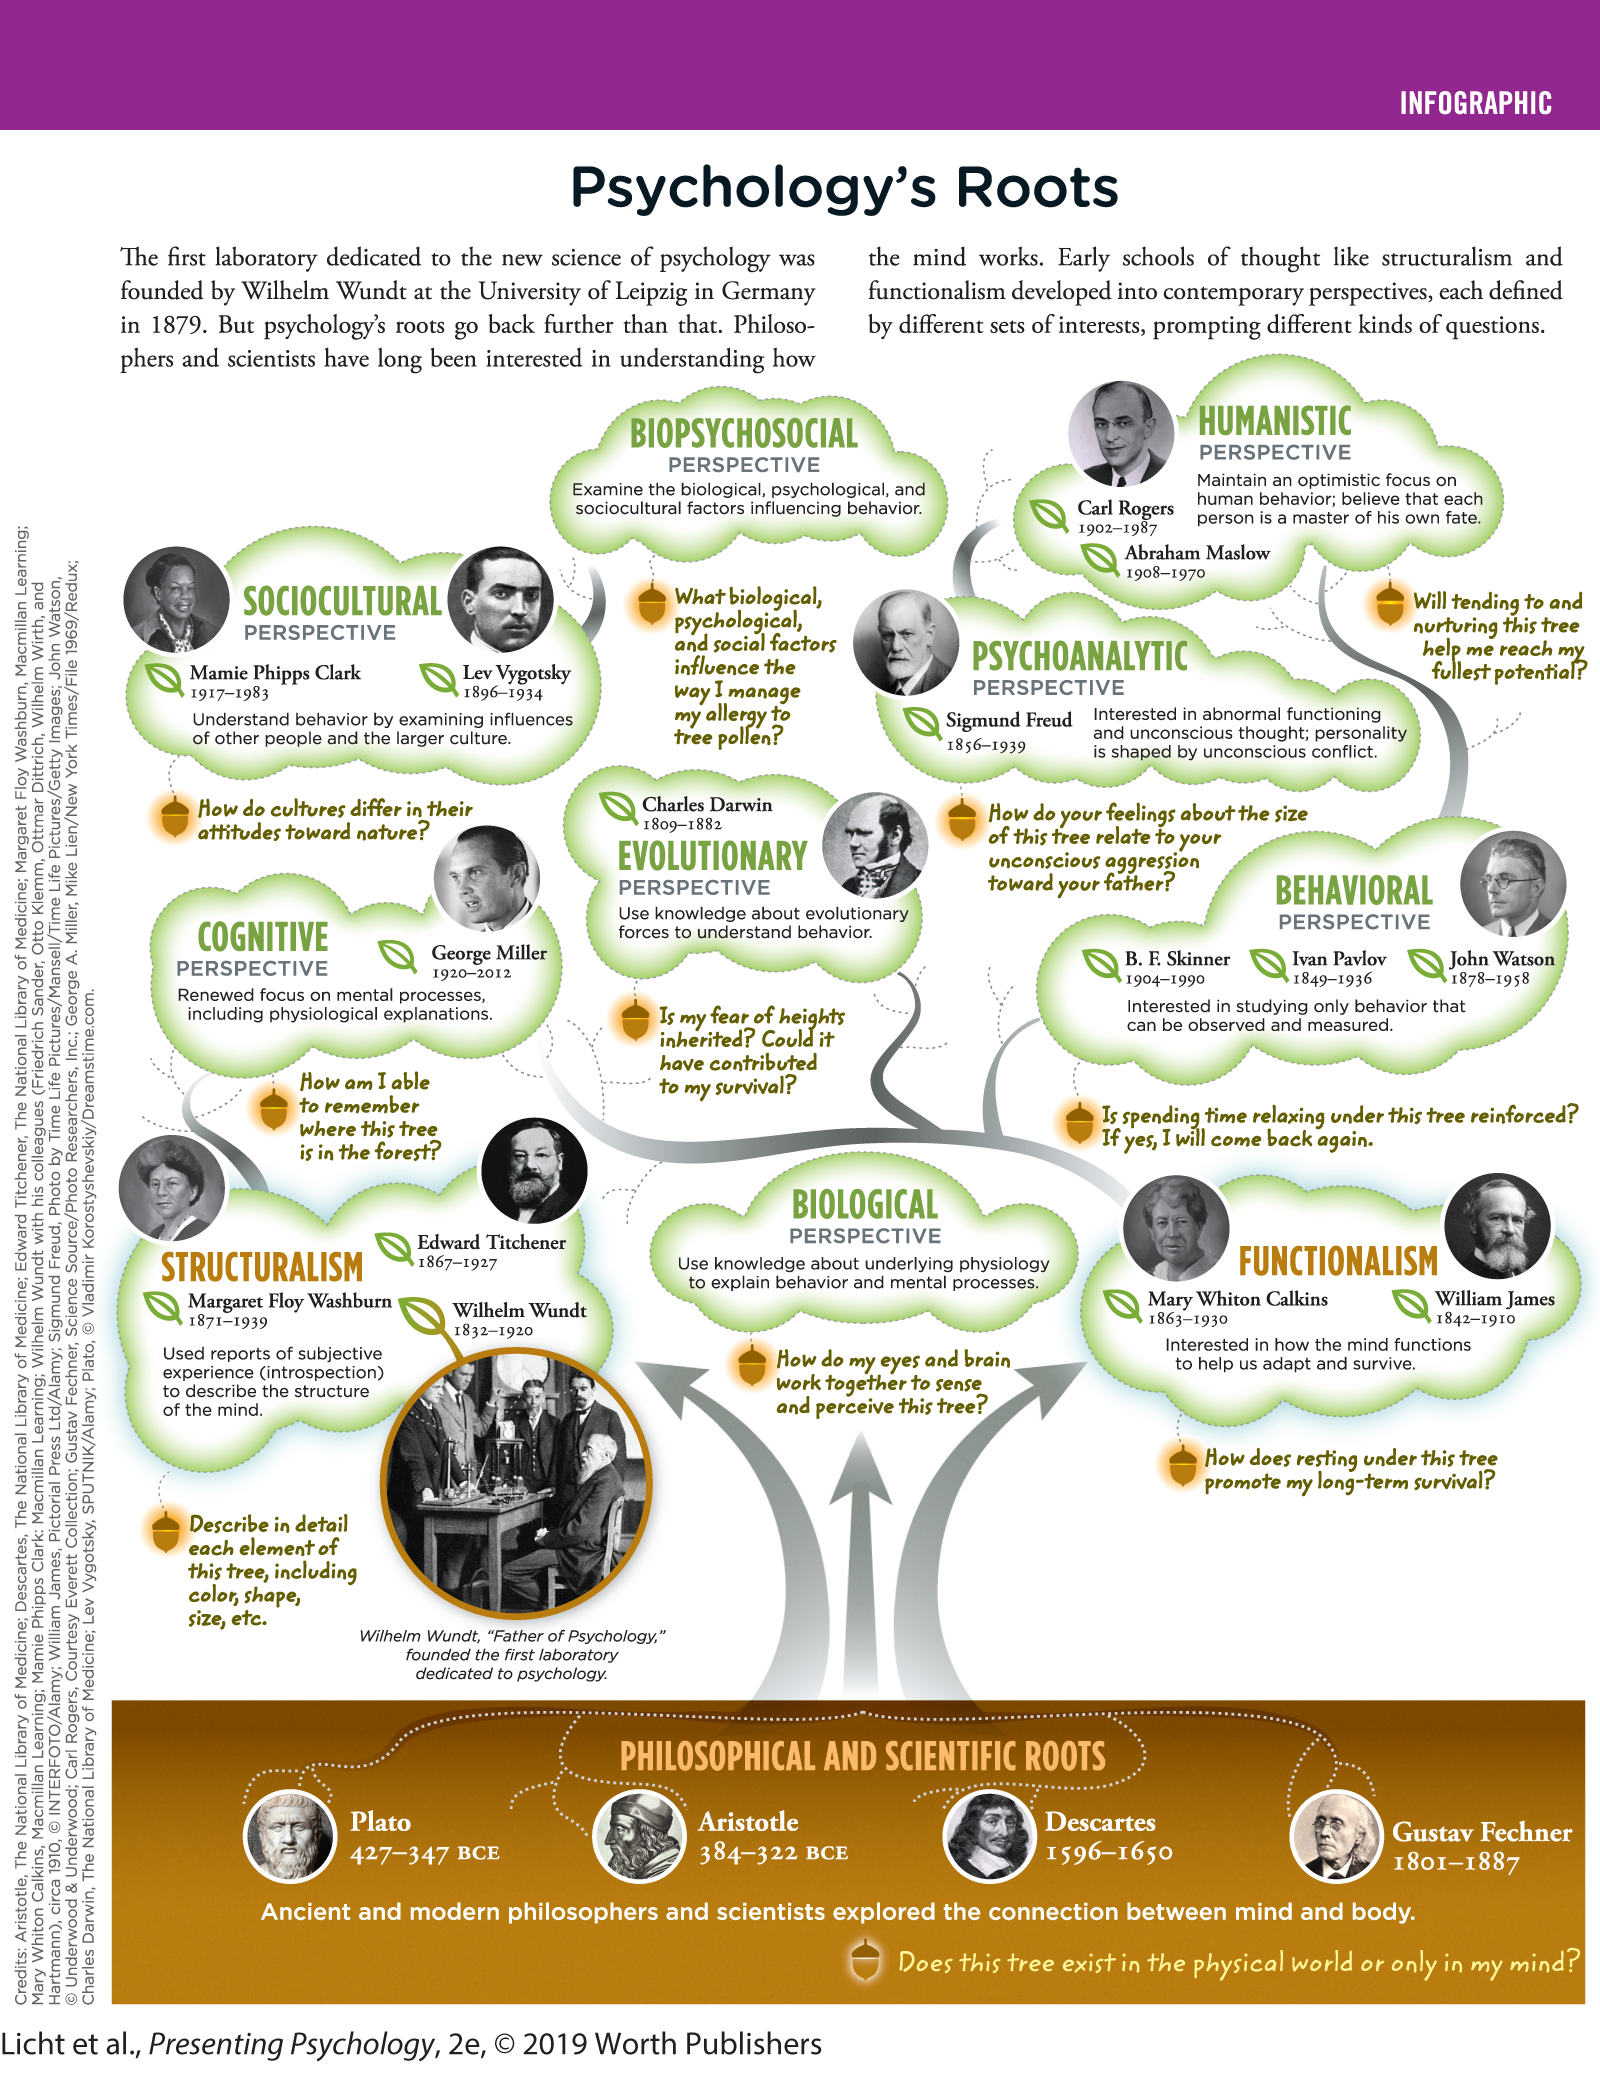 An infographic presented as a tree diagram shows the philosophical and scientific developments in the determining of psychology’s roots. You can read full description from the link below